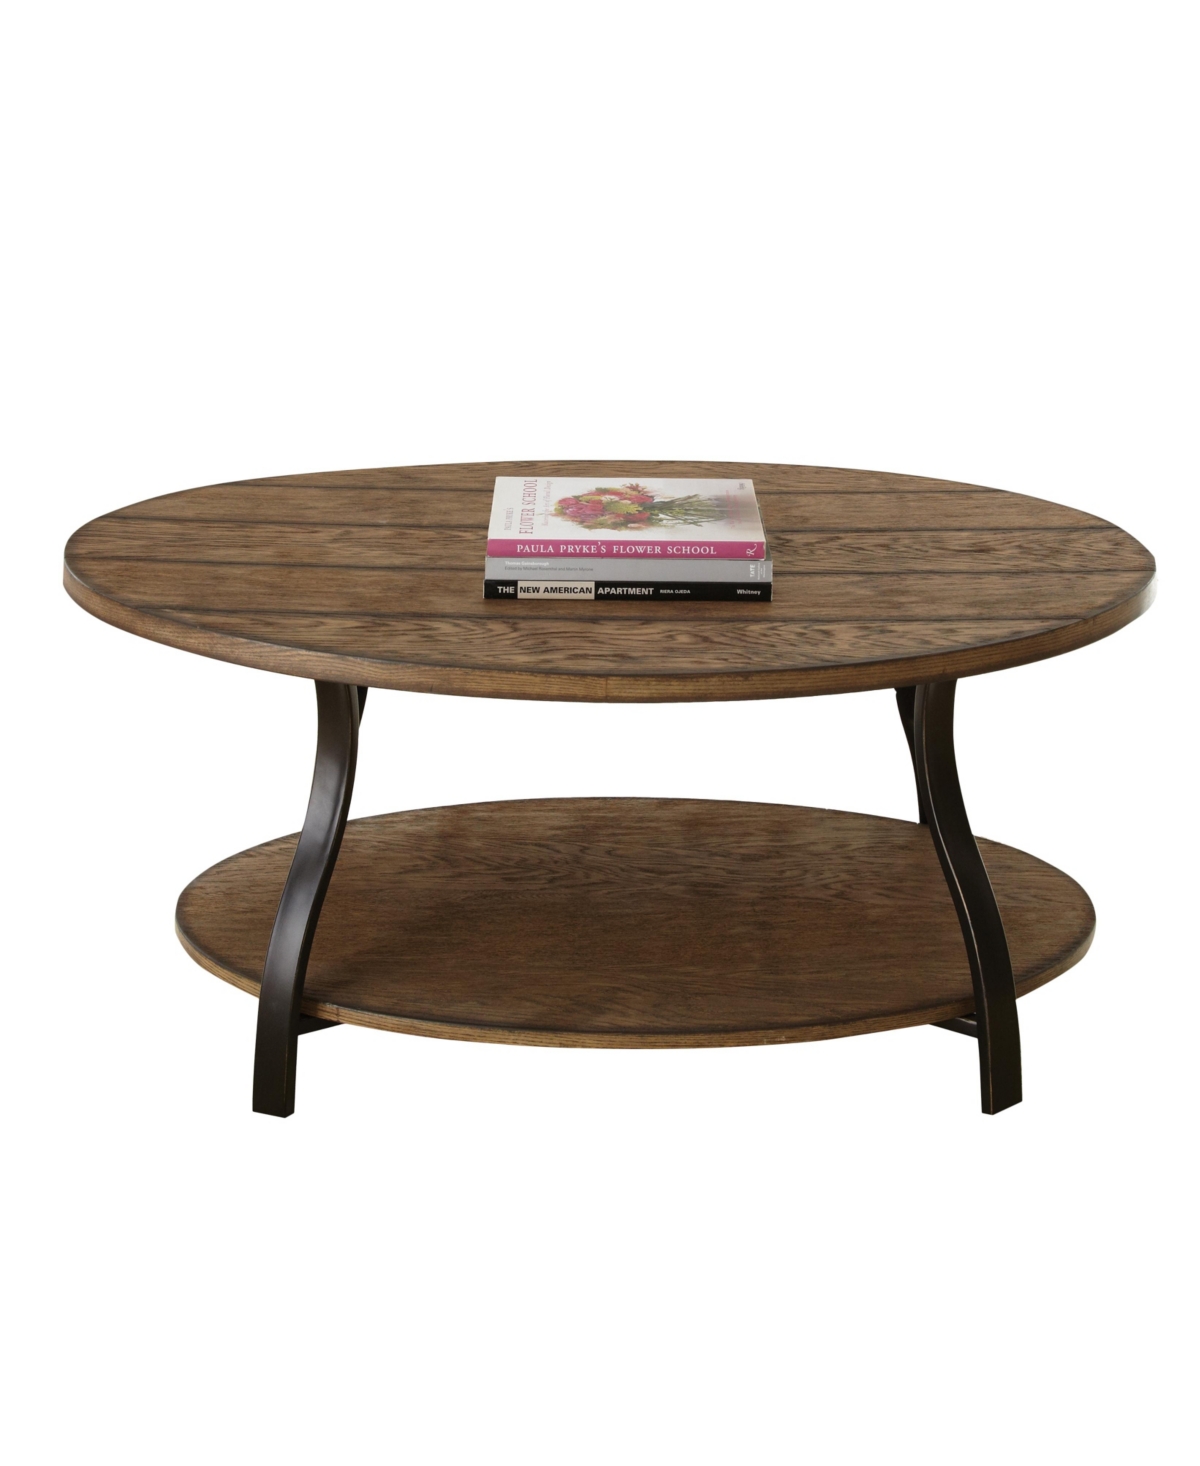 Steve Silver Denise 47" Oval Wood And Metal Cocktail Table In Oak Finish With Hand Applied Burnish